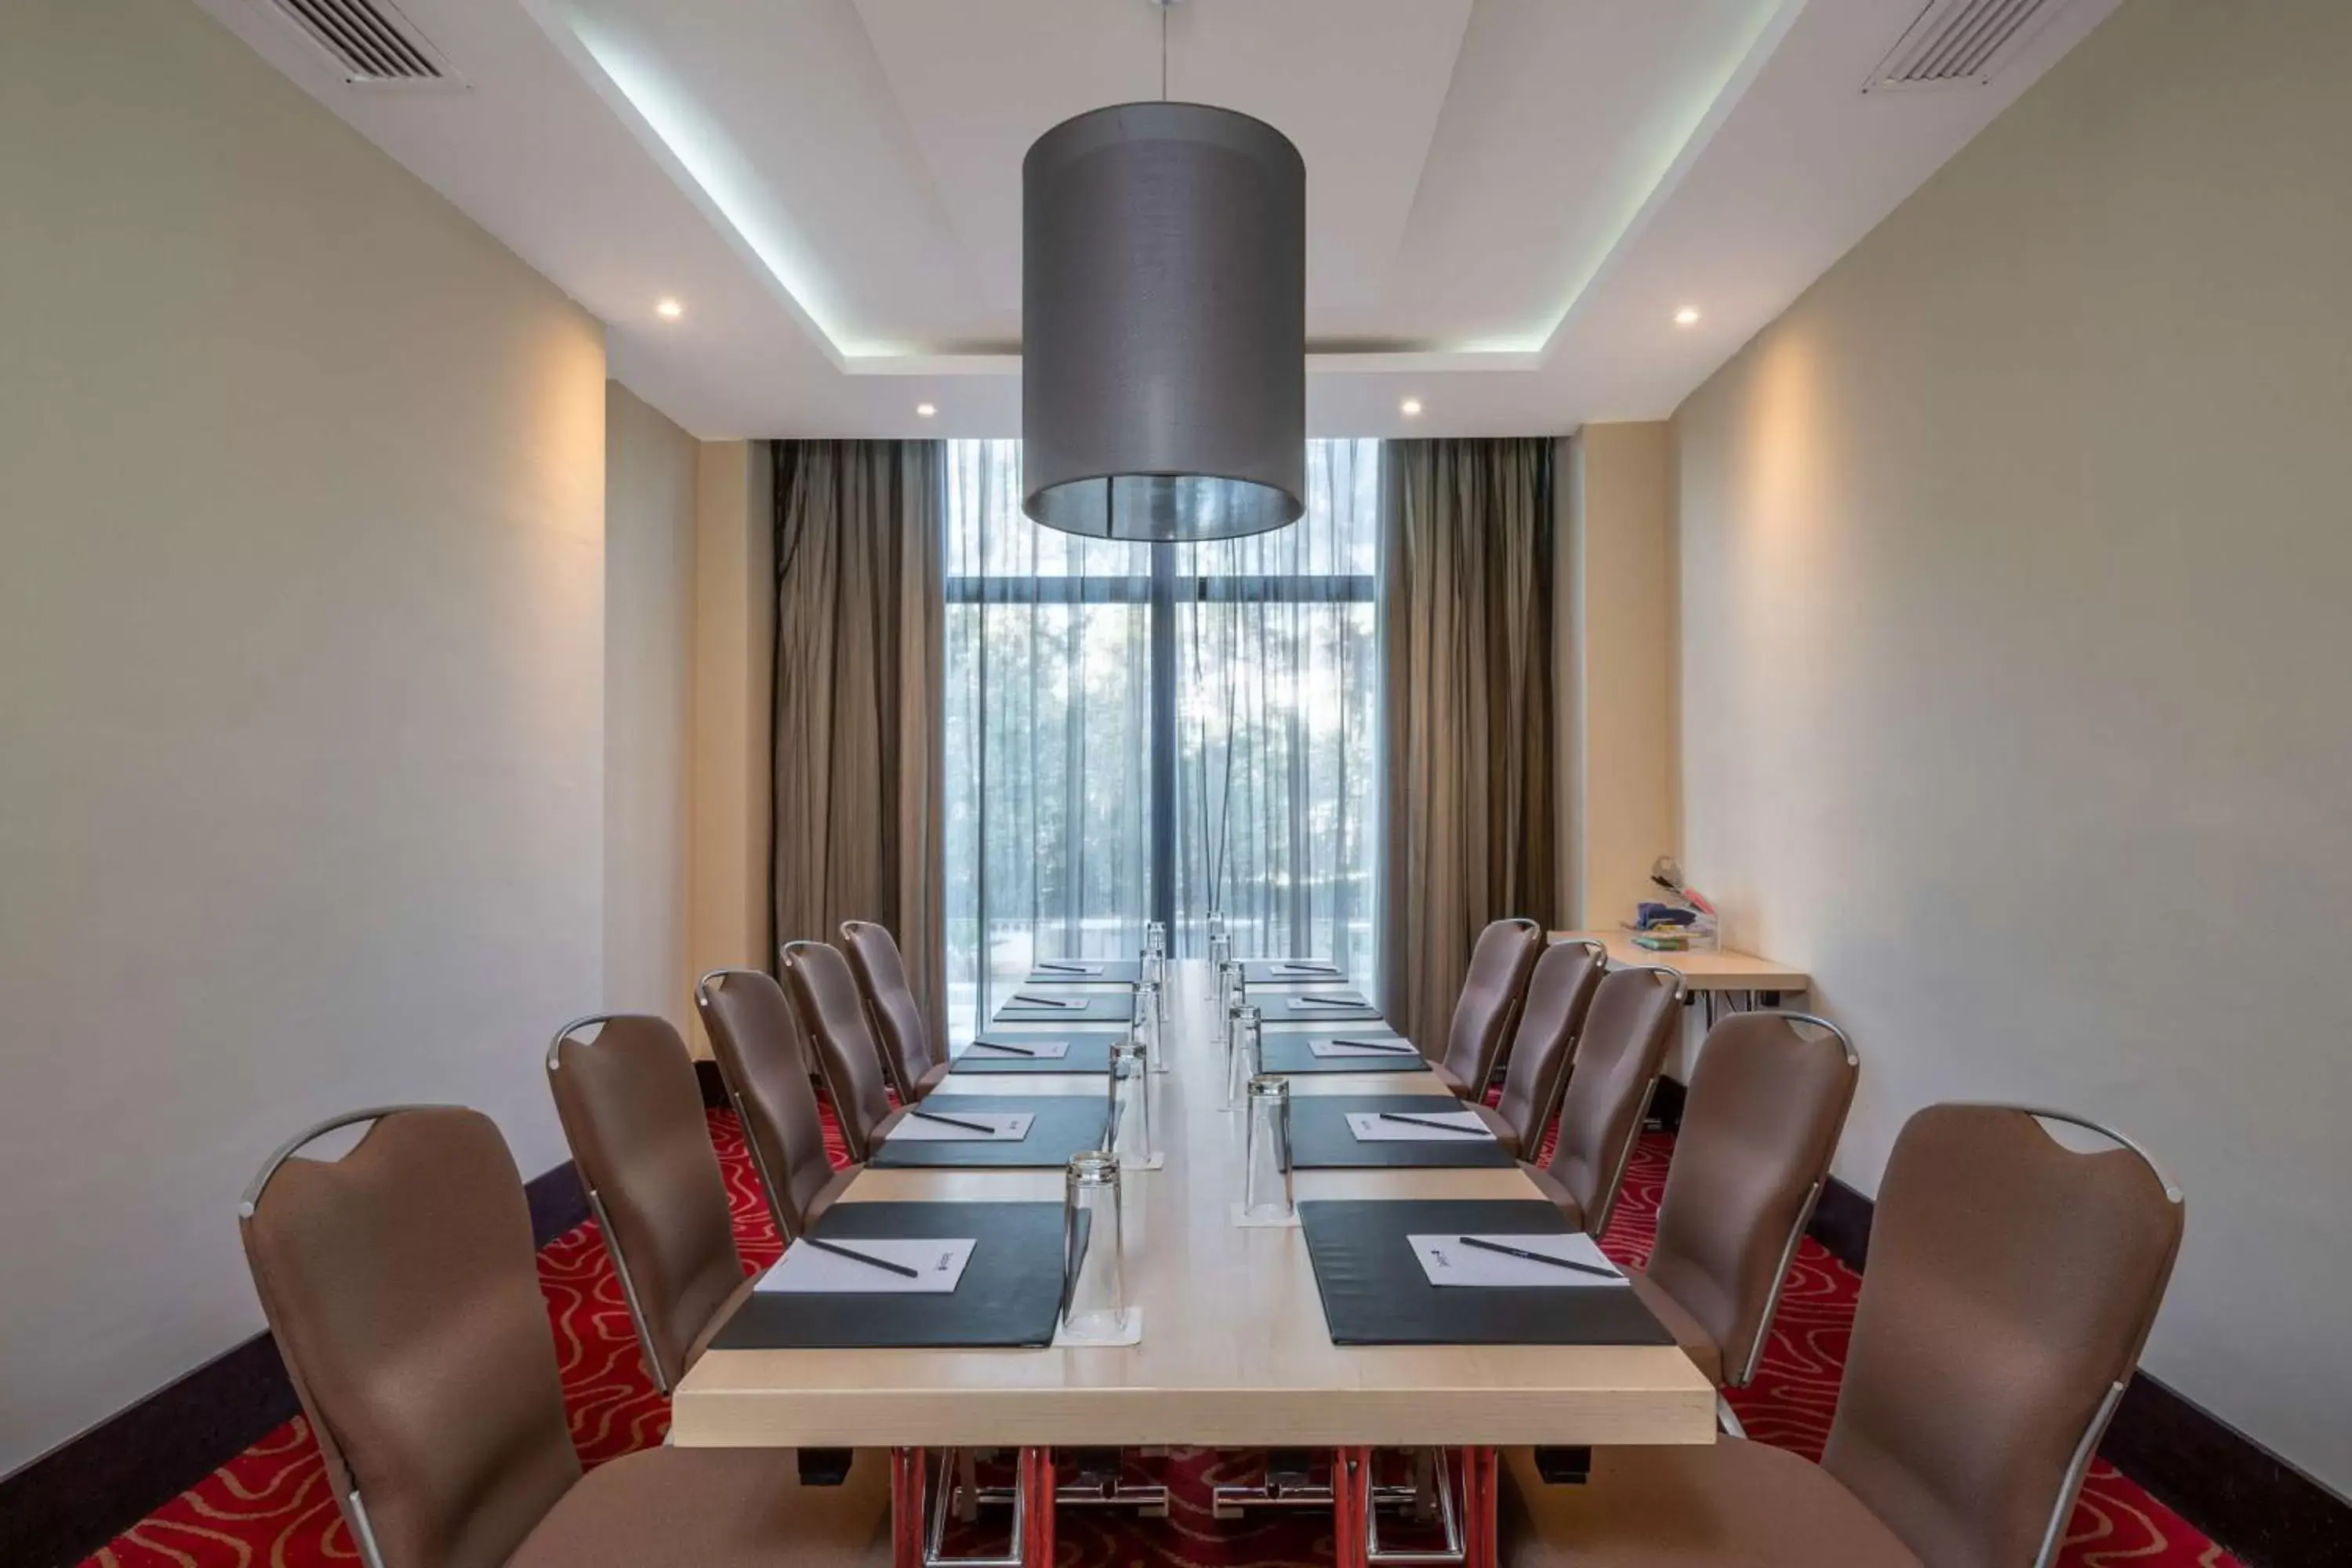 Meeting/conference room in Radisson Blu Hotel, Addis Ababa